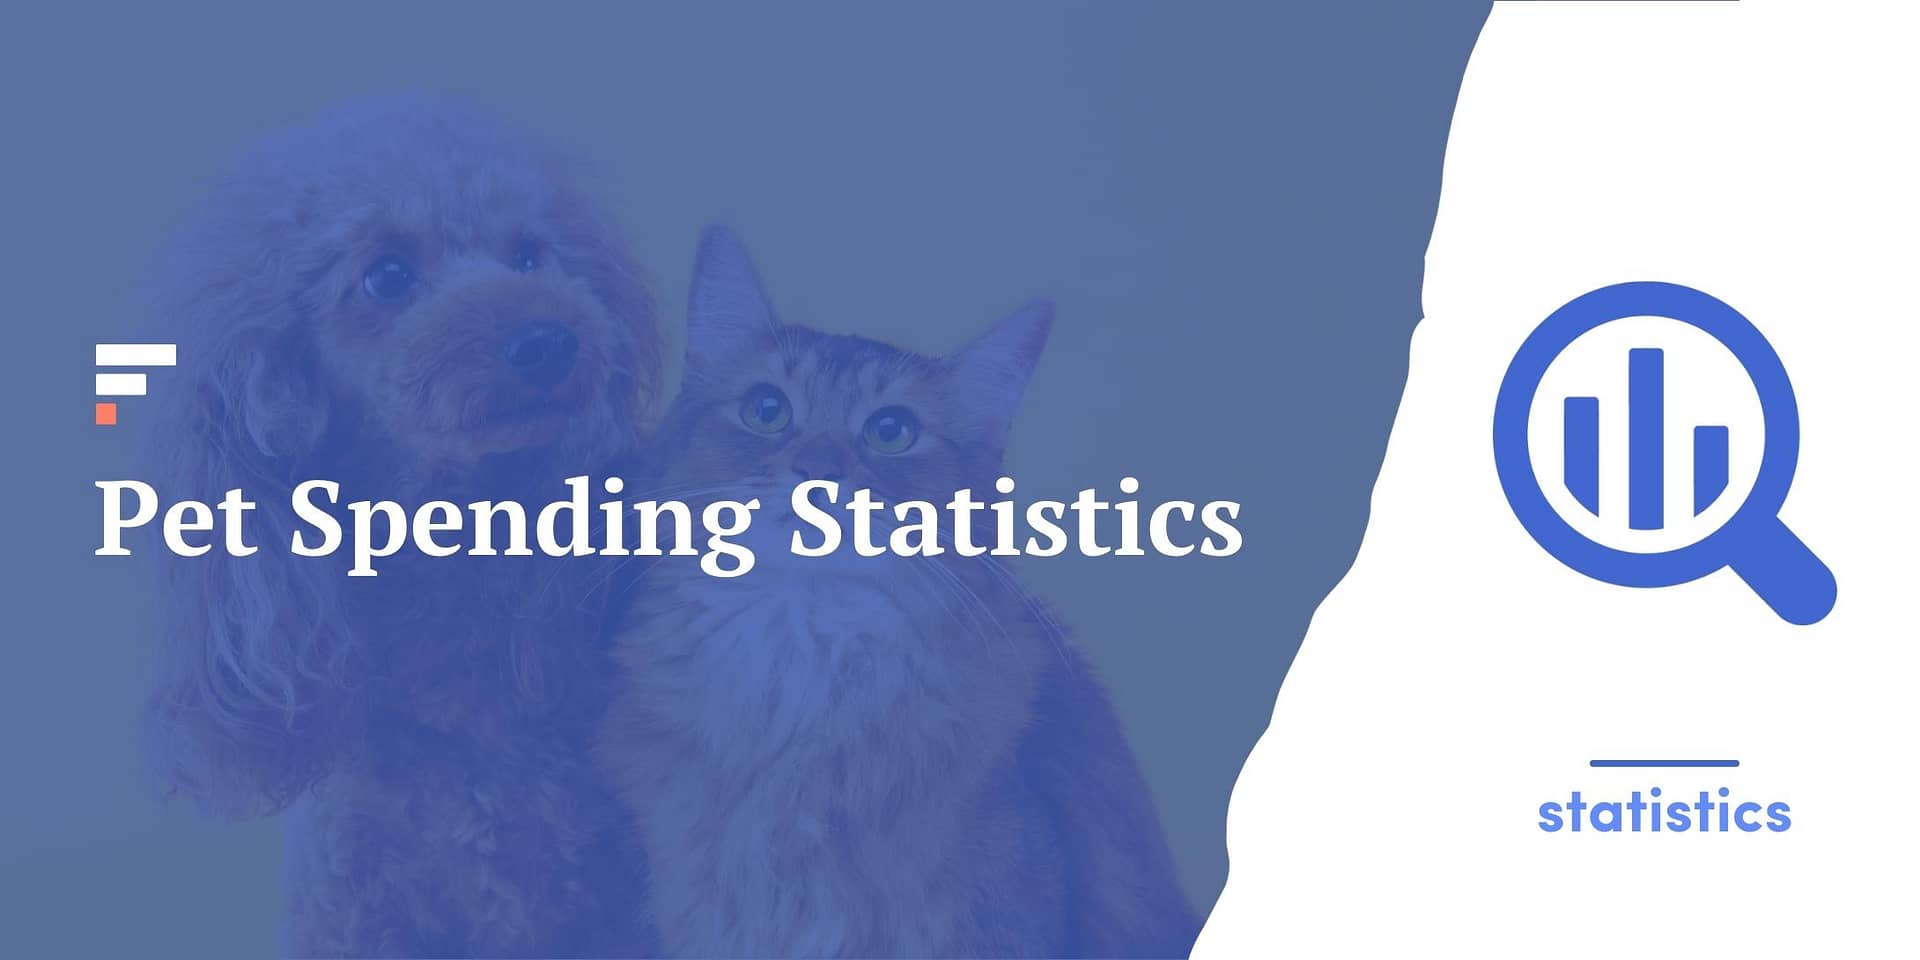 Pet Spending Statistics (2022): How Much Do Americans Spend On Pets?